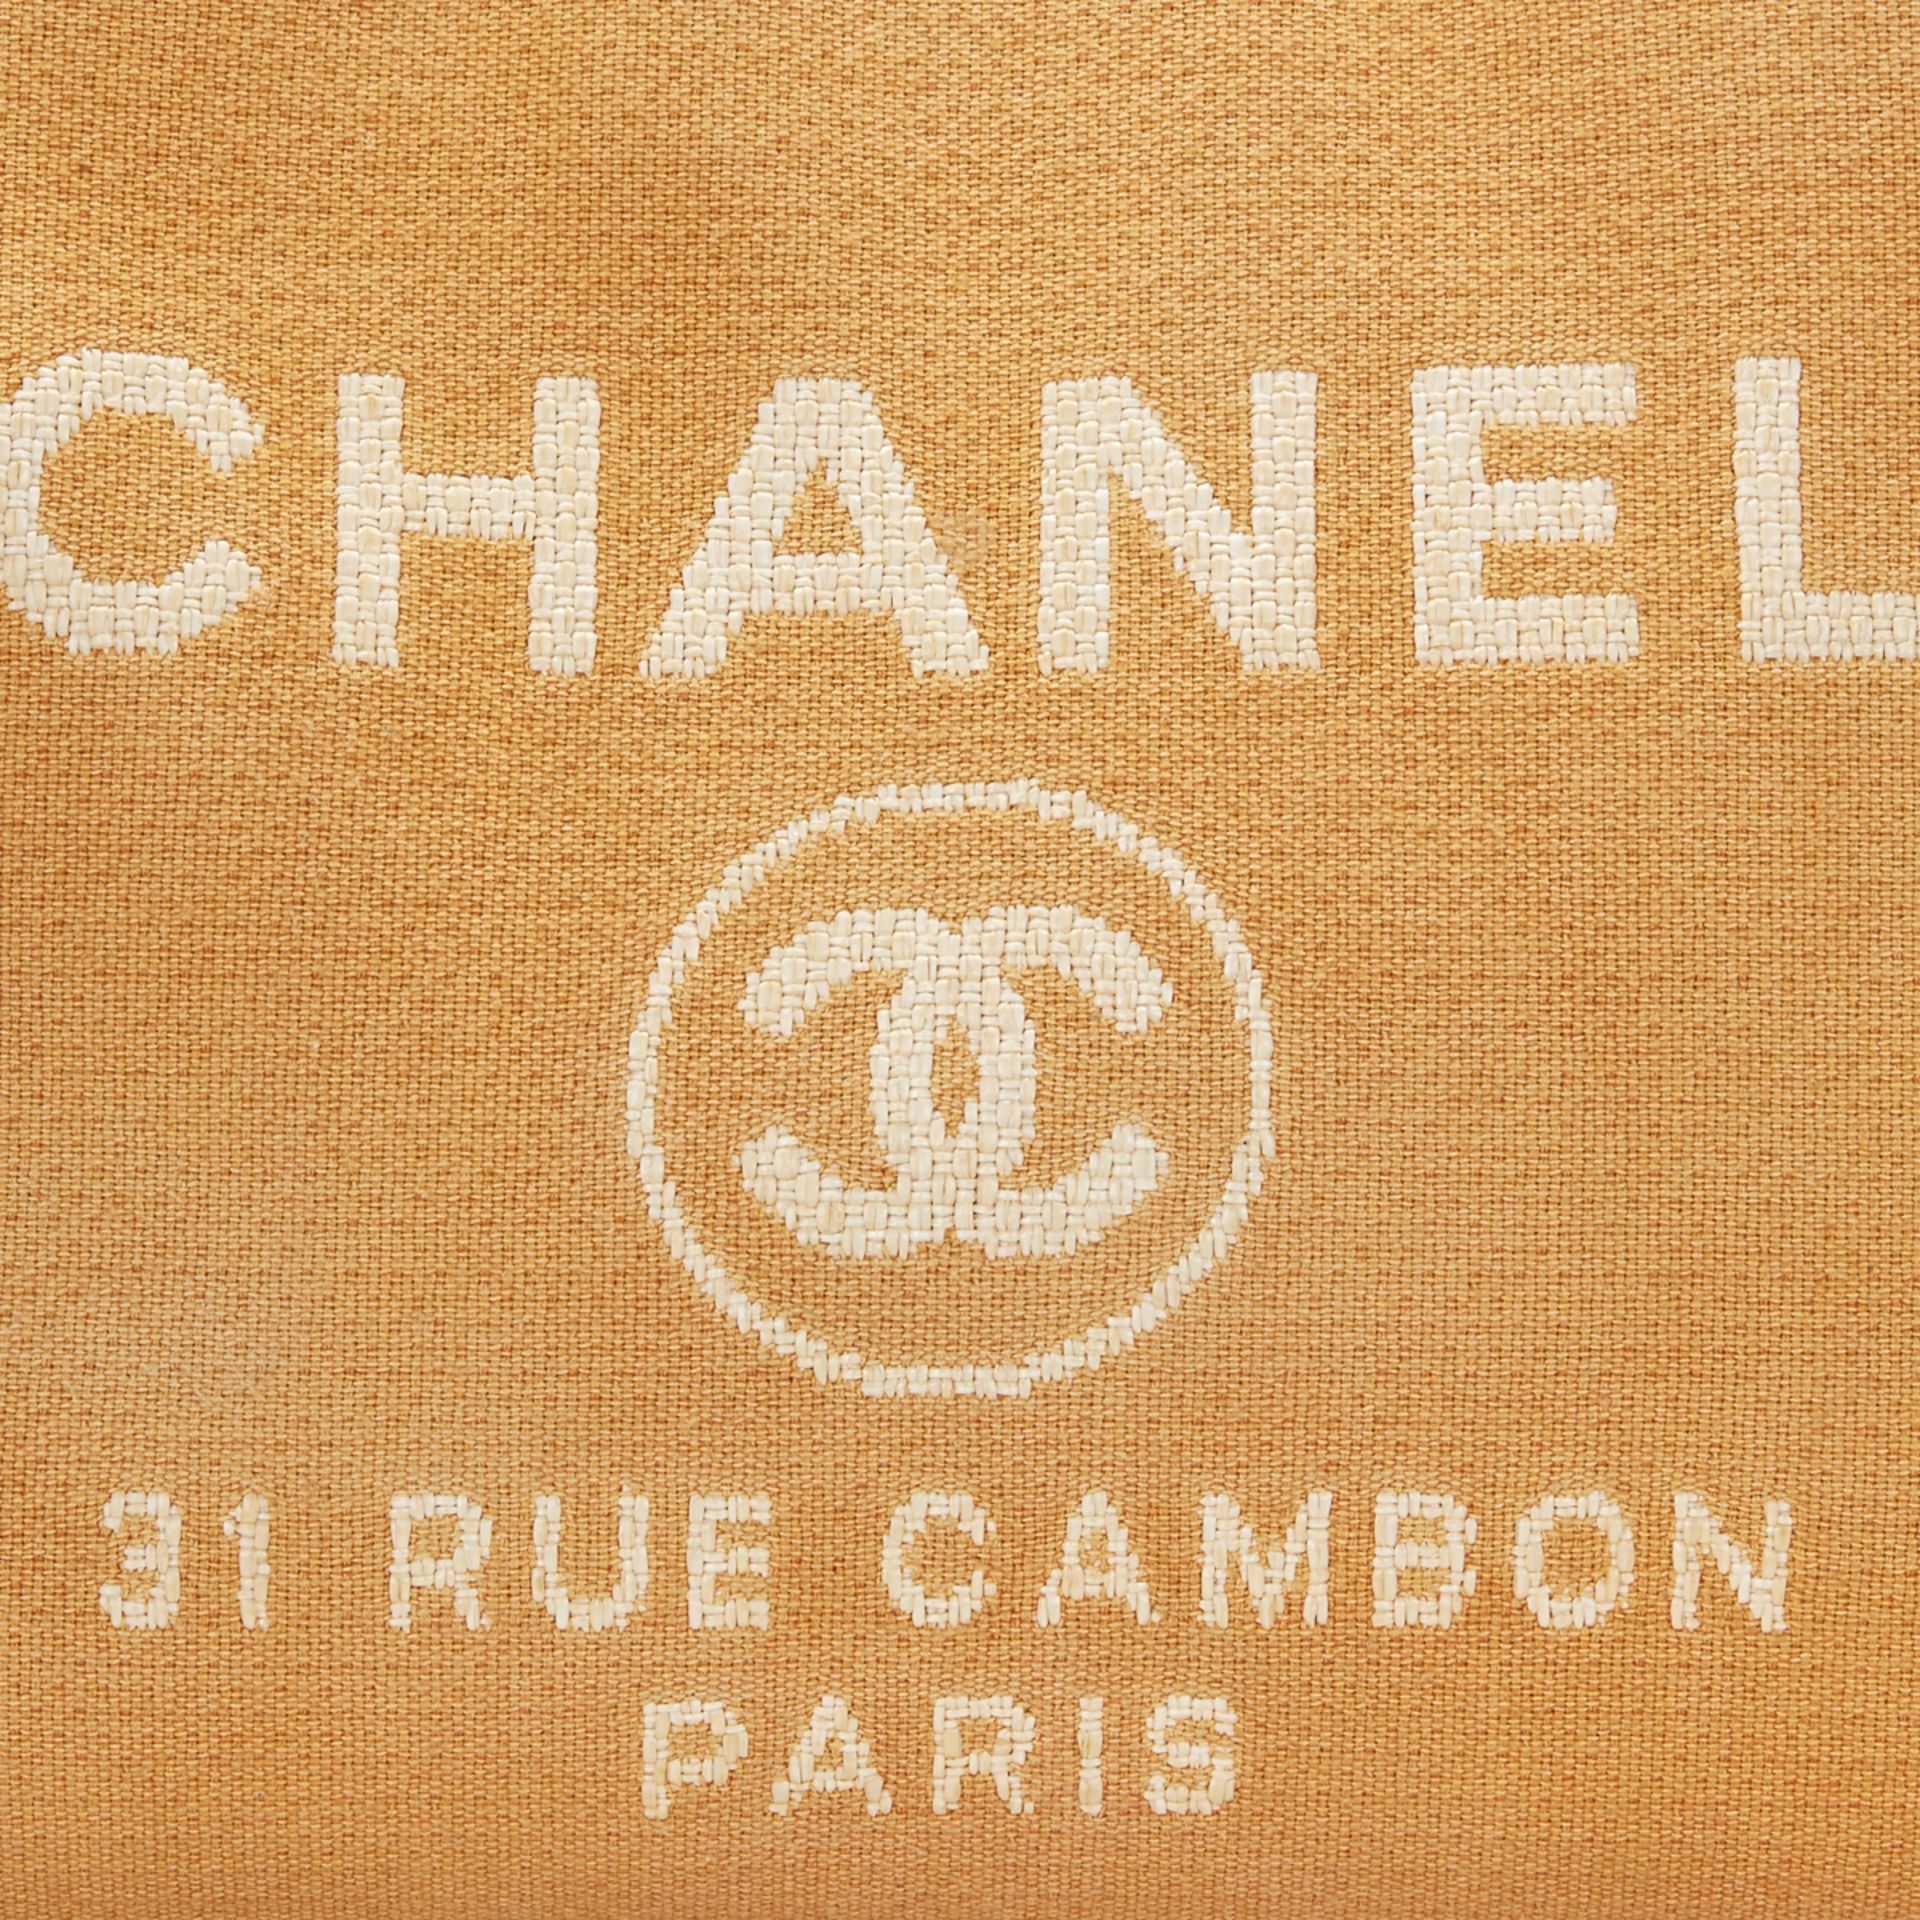 CHANEL Small Deauville Tote - Image 6 of 10